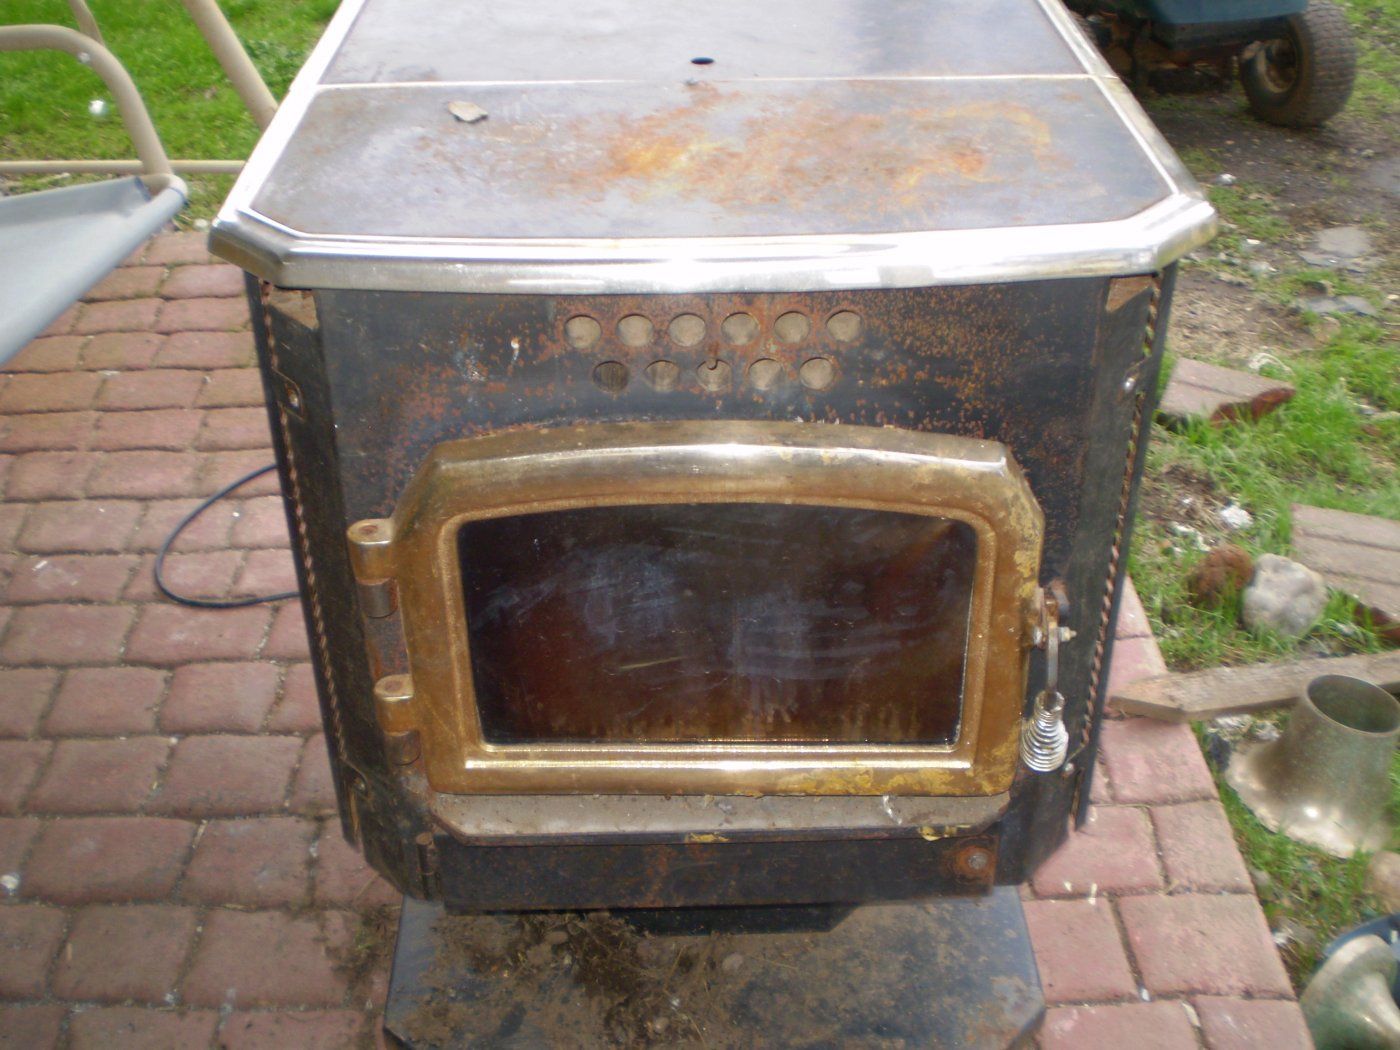 Can Anyone Identify The Brand Of This Pellet Stove I Need